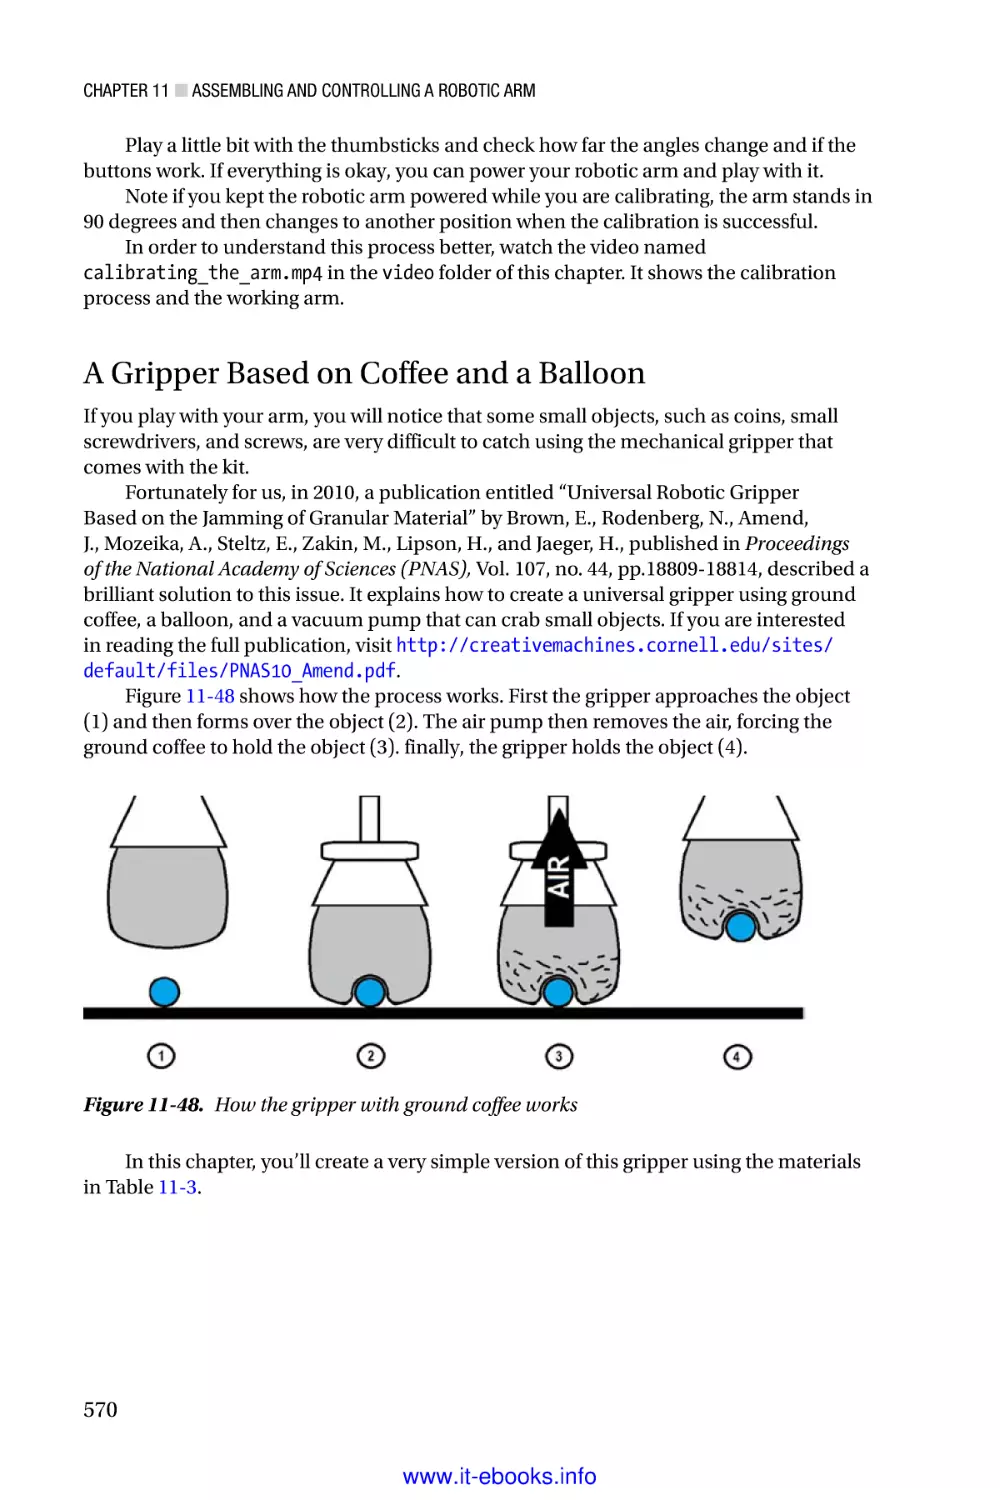 A Gripper Based on Coffee and a Balloon